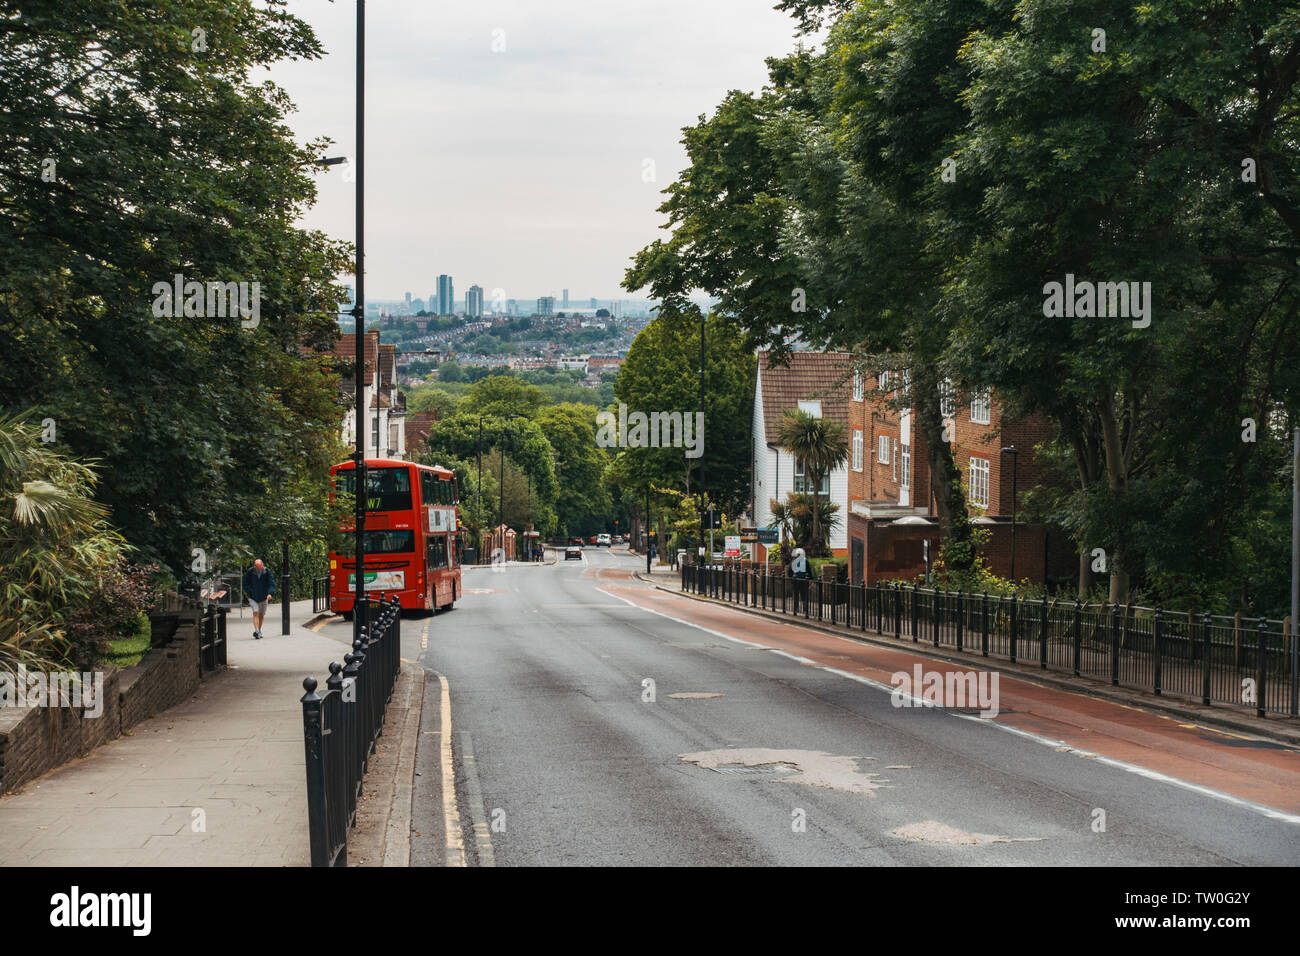 A double decker bus pulls out from a stop in Muswell Hill, North London. Stock Photo